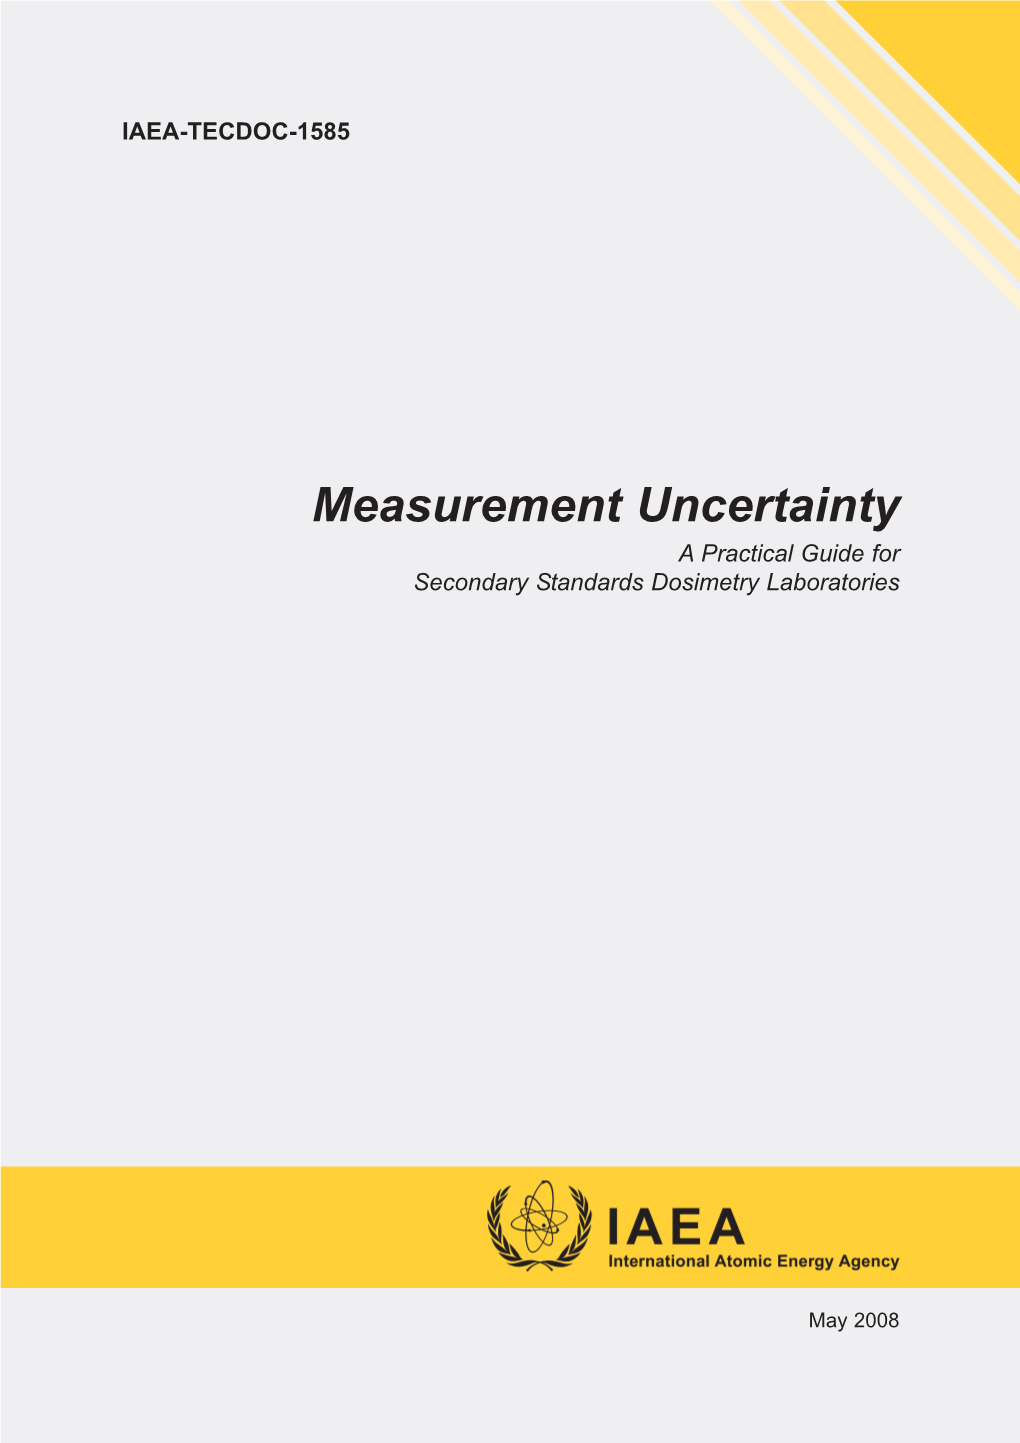 Measurement Uncertainty a Practical Guide for Secondary Standards Dosimetry Laboratories